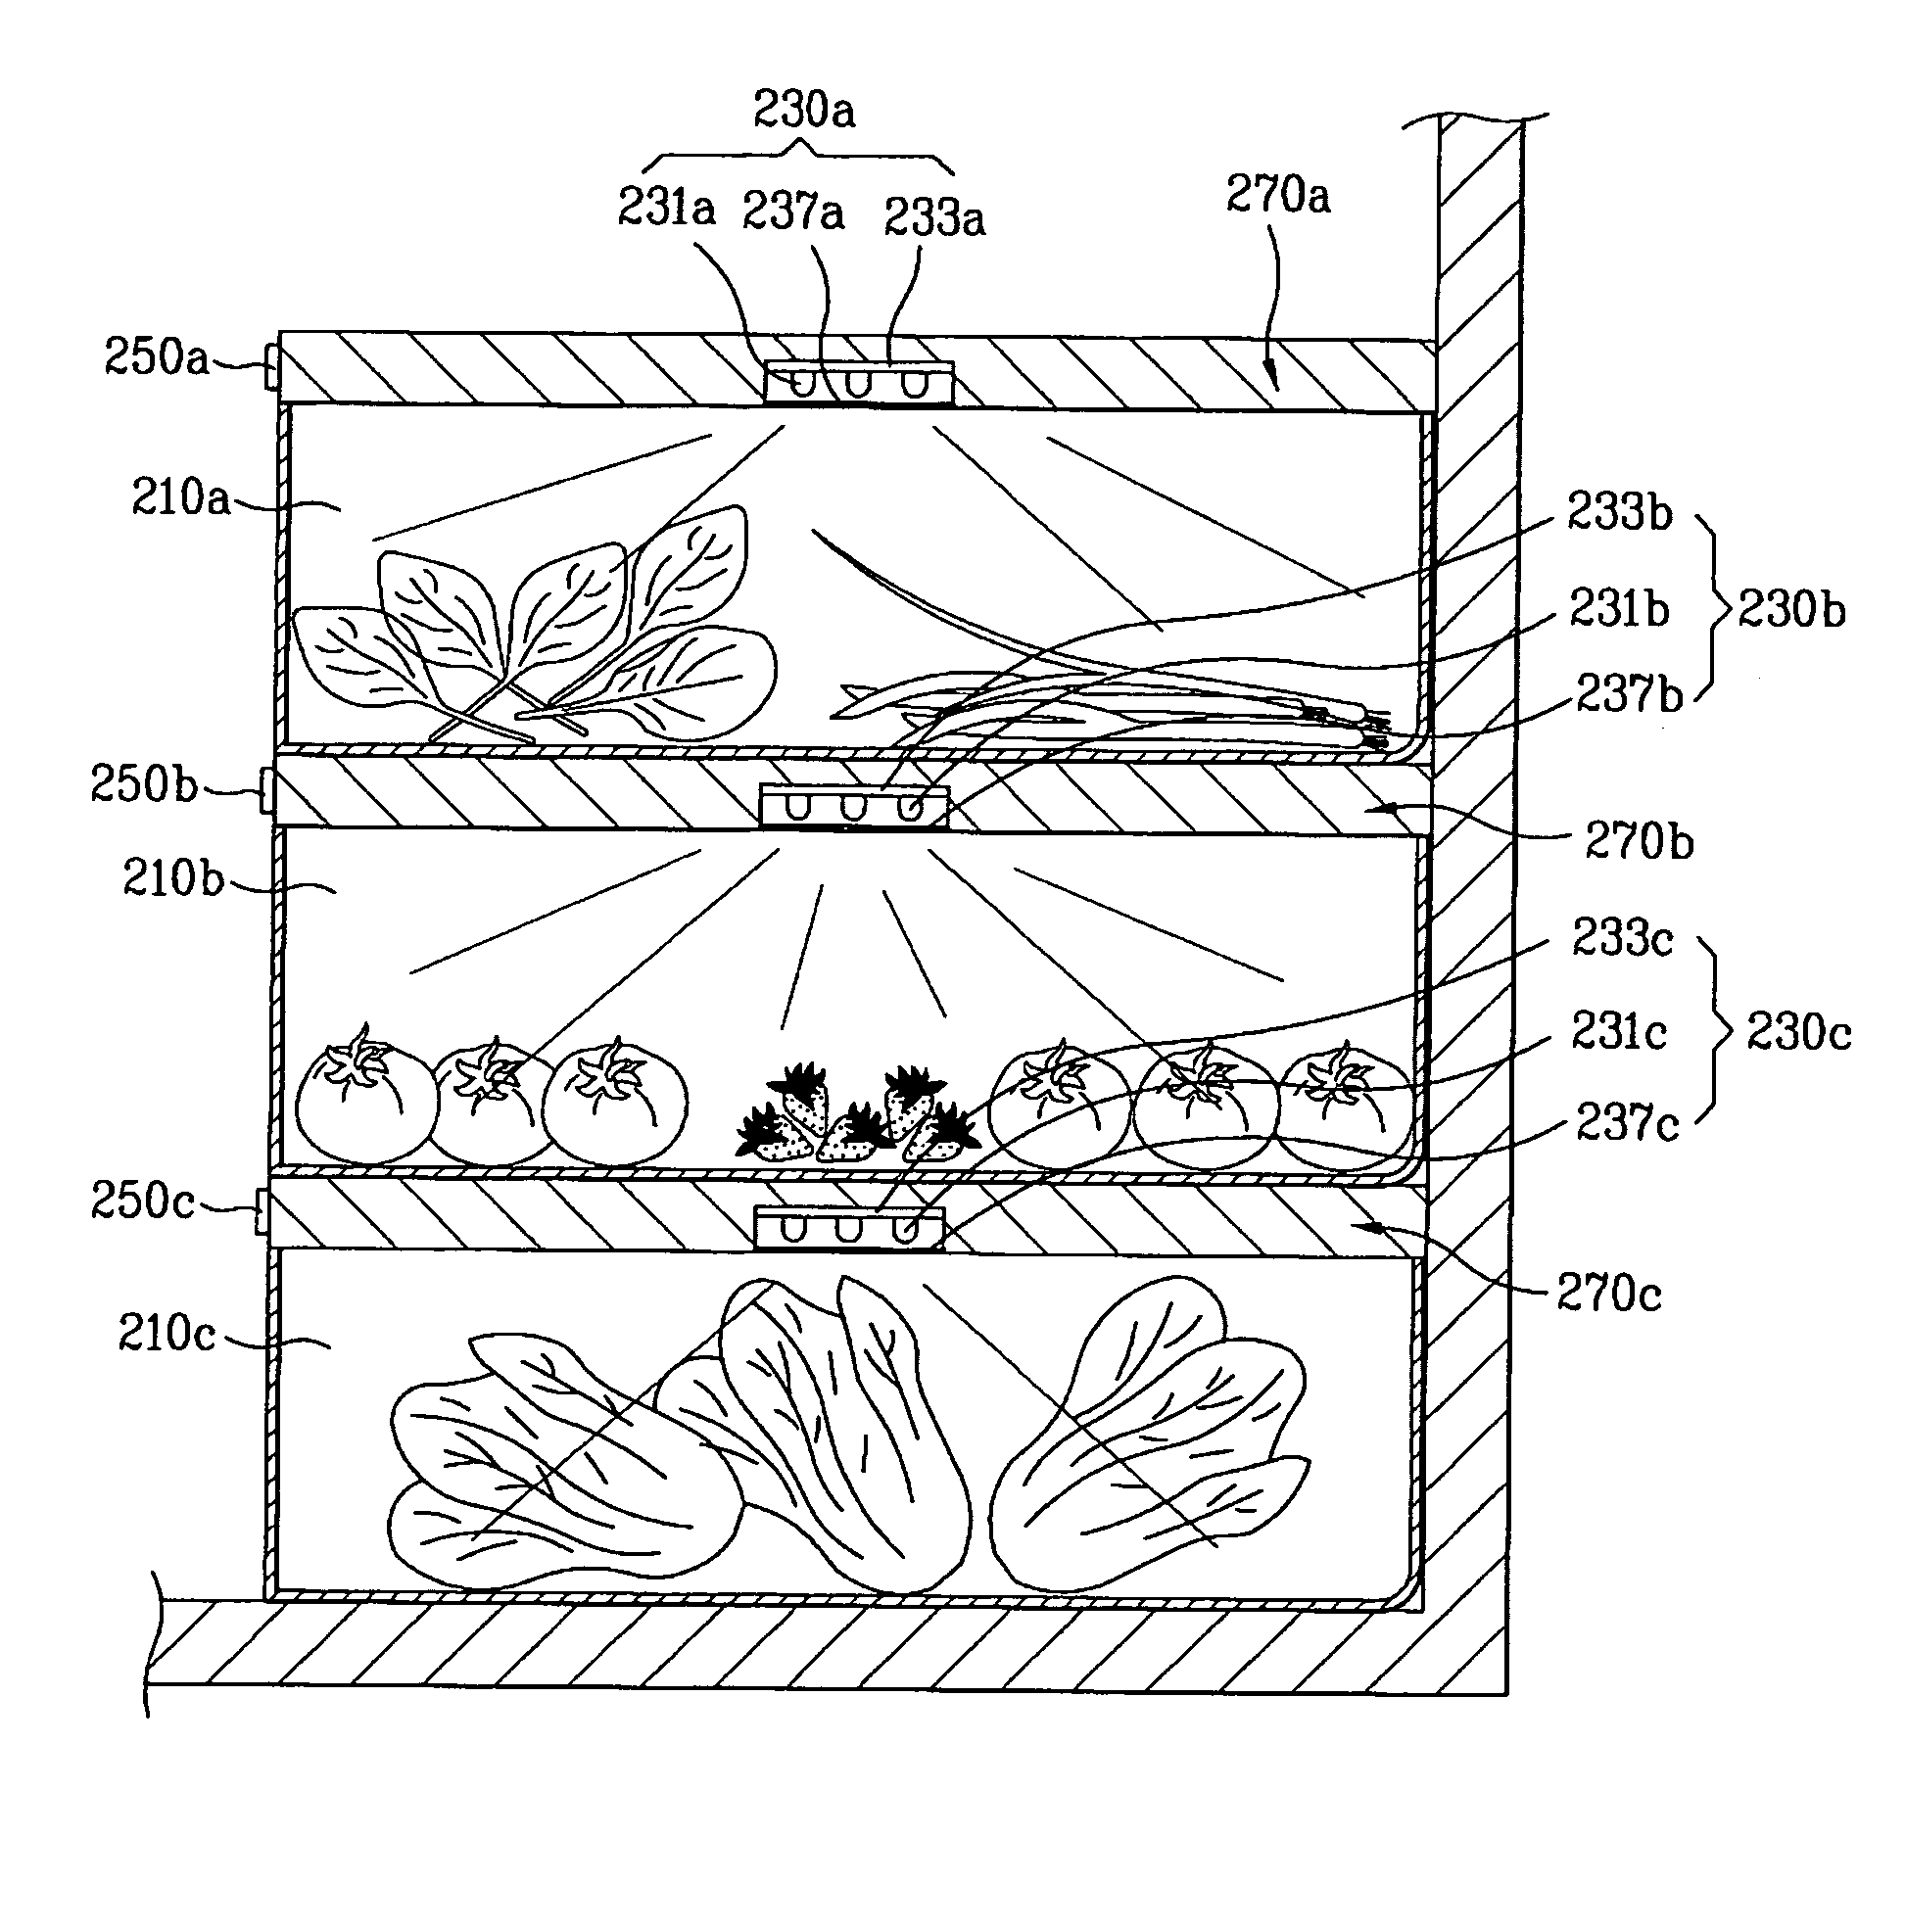 Refrigerator and method for keeping food using the same